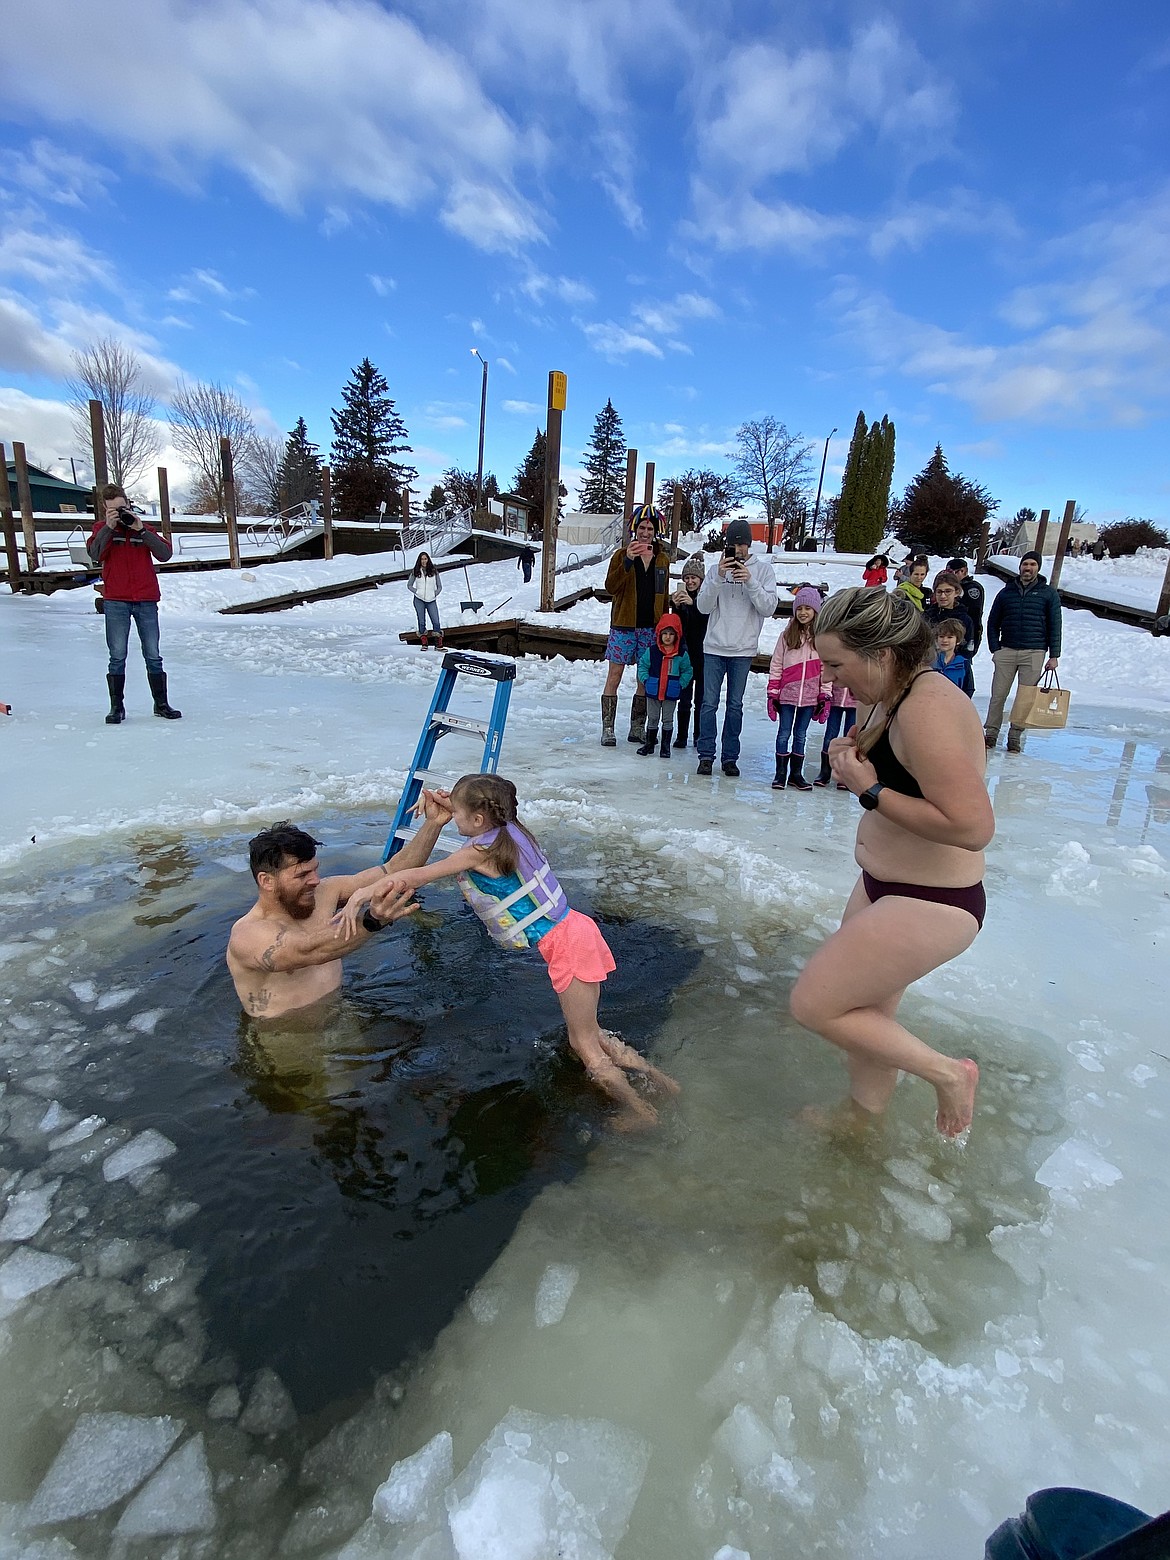 A family takes part in the annual Polar Bear Plunge on Sunday. The event is a collaboration by Boy Scout Troop 111 and the city of Sandpoint.